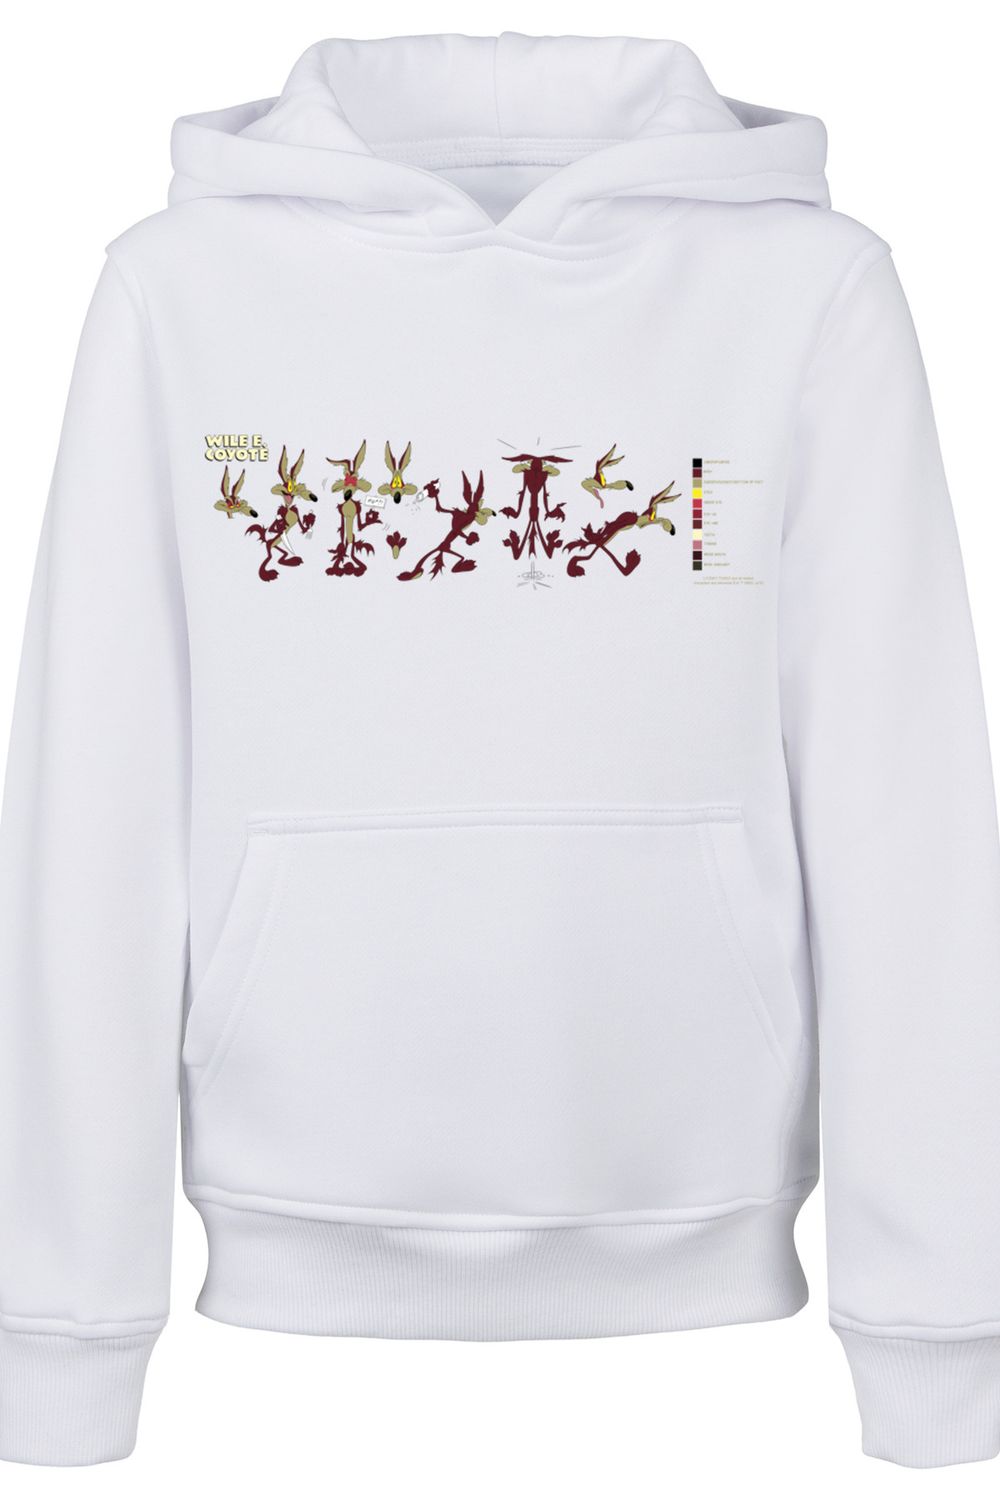 Looney Tunes E Basic Kids Trendyol F4NT4STIC mit Wile - Kinder Farbcode Coyote Hoody